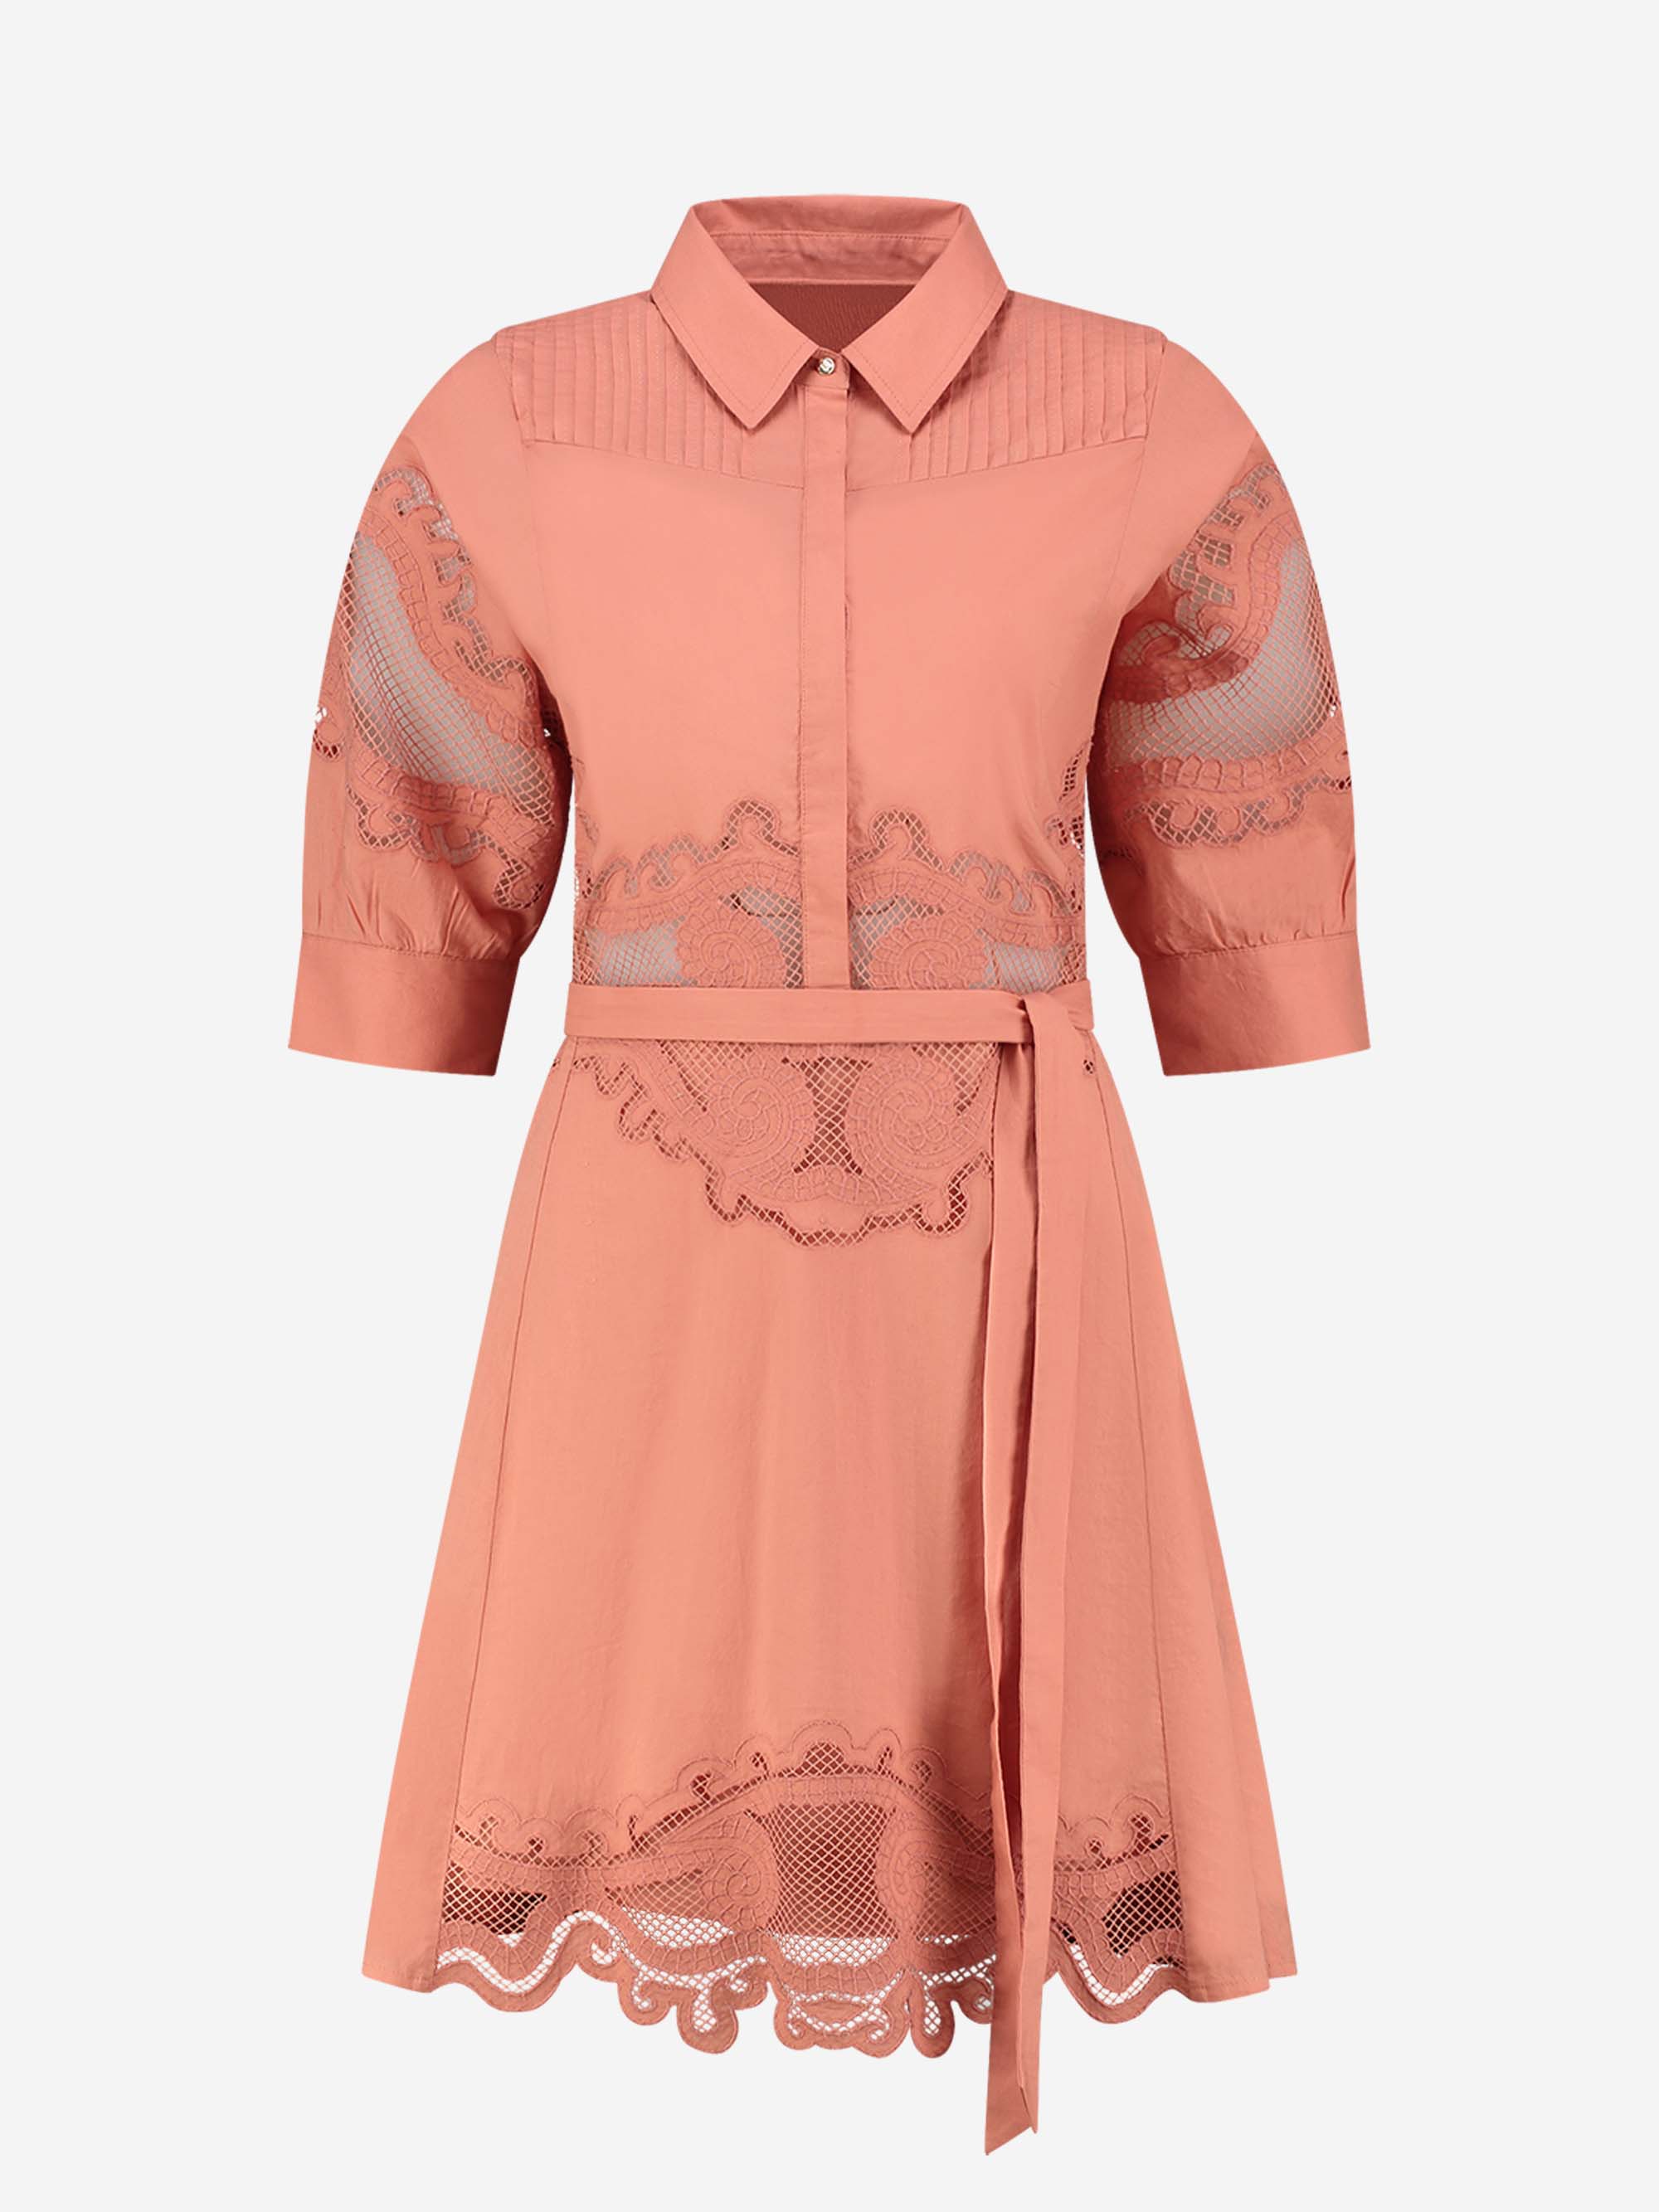 Laced dress with tie belt 